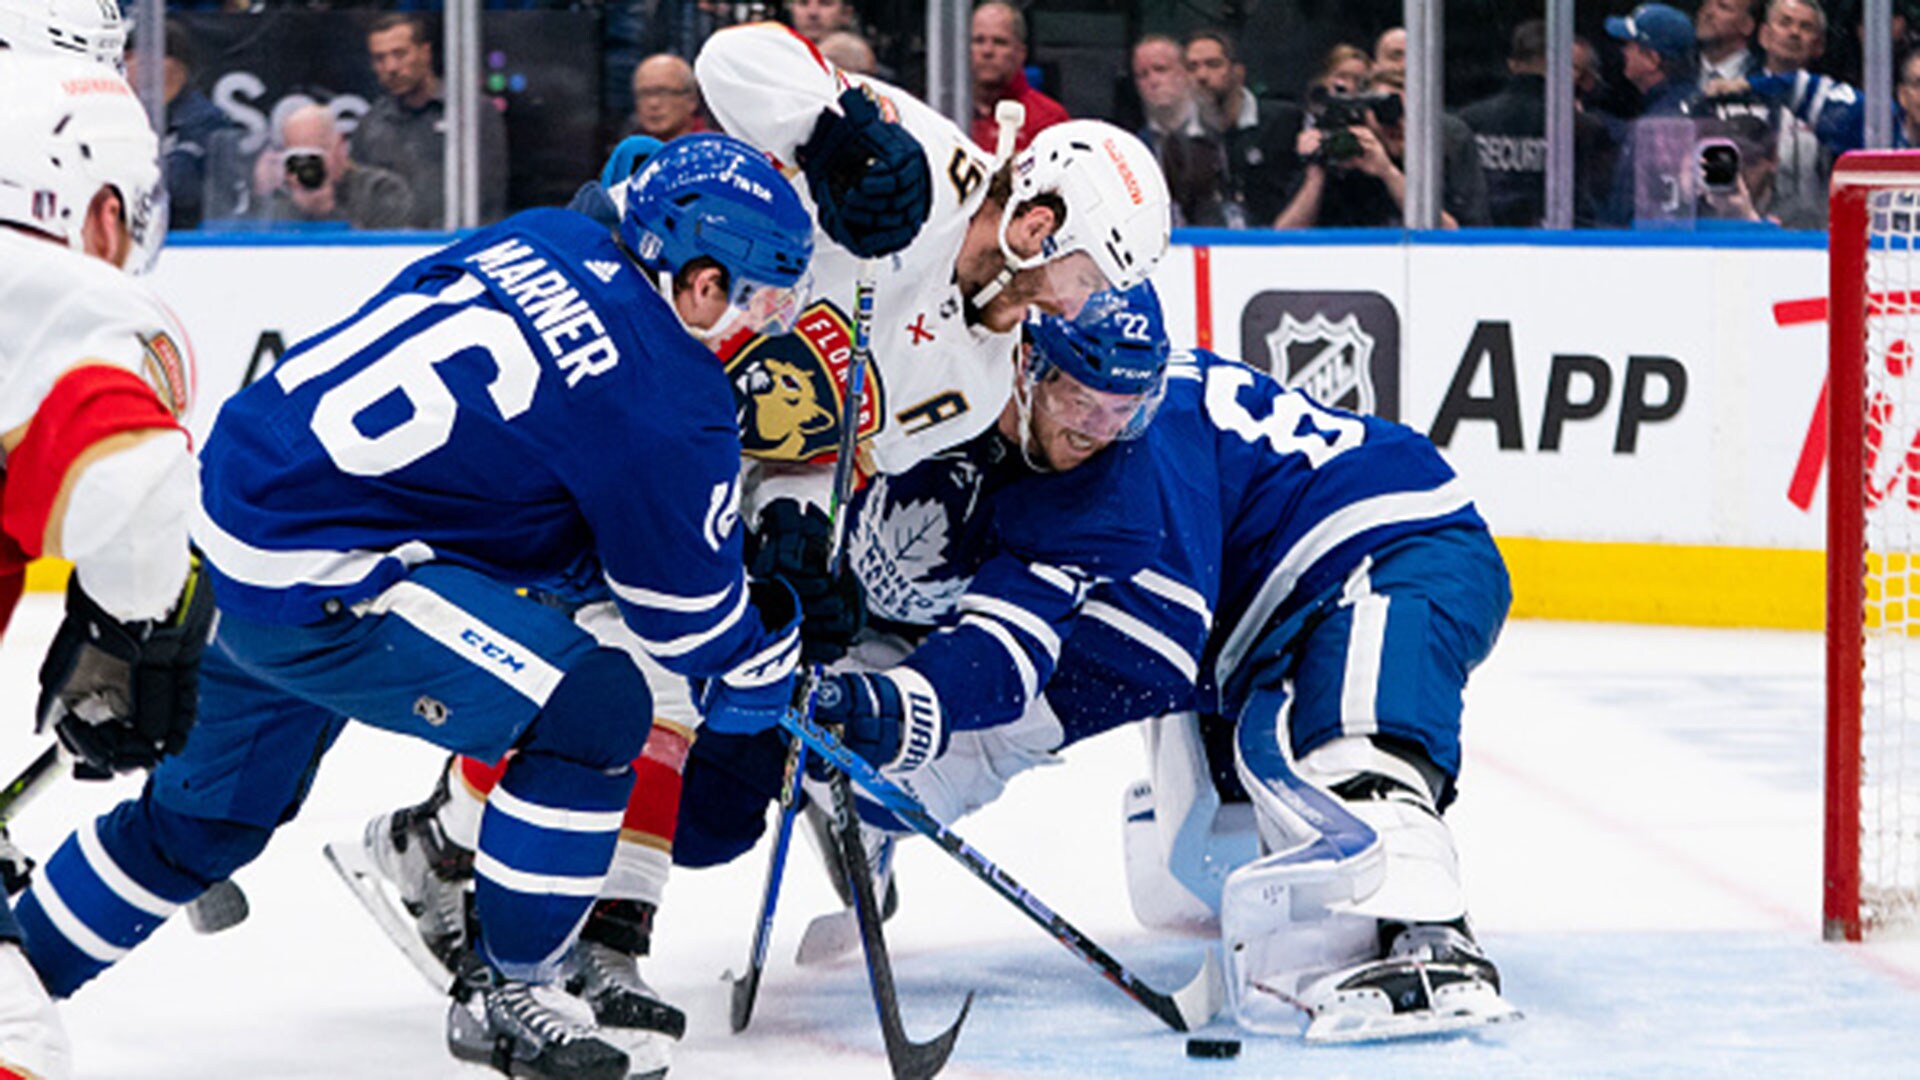 Toronto Maple Leafs primed for playoff rematch with Tampa Bay Lightning